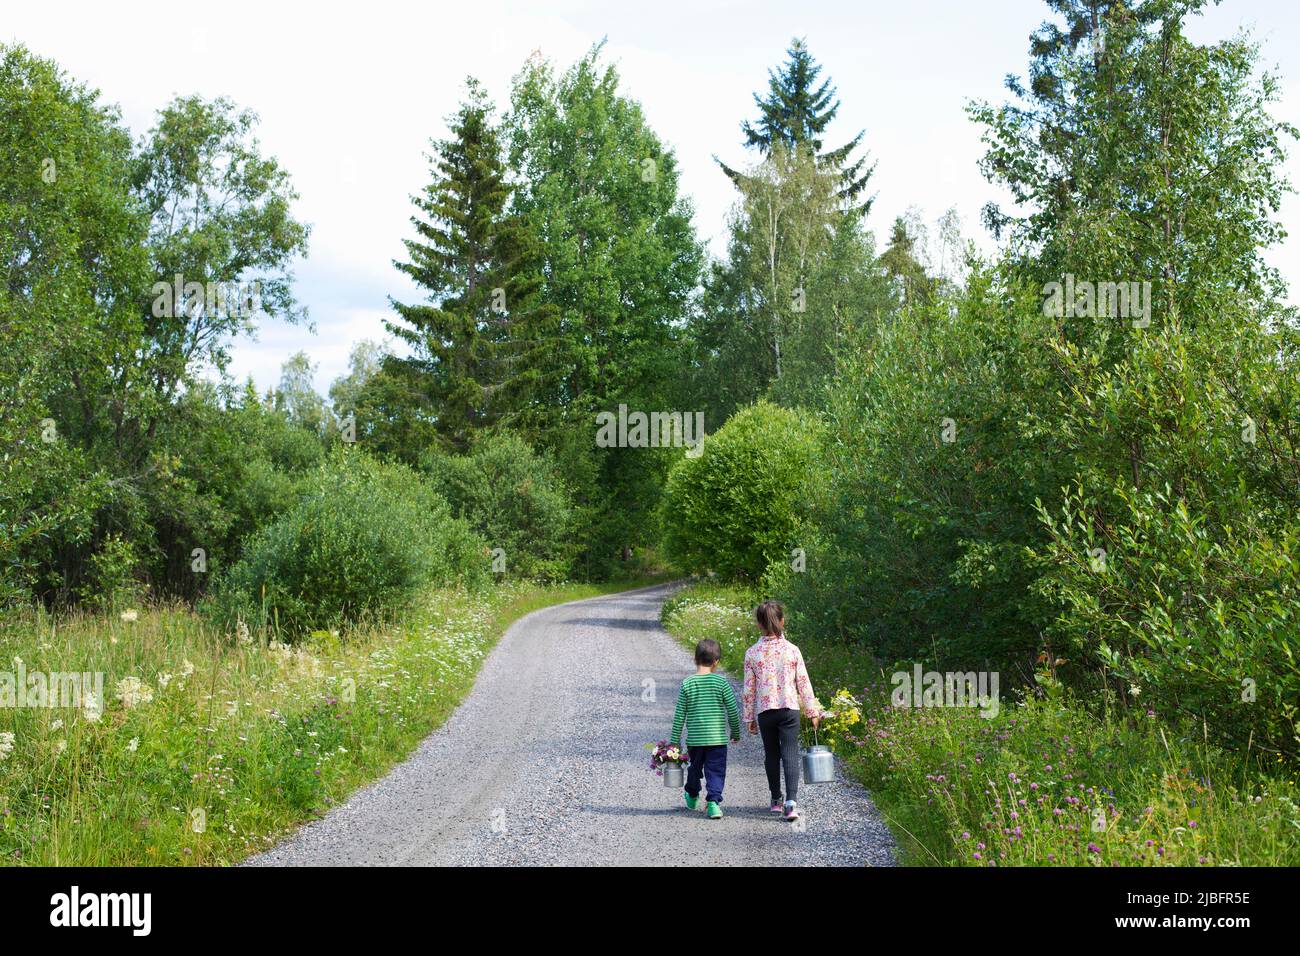 Siblings with flowers walking on road Stock Photo